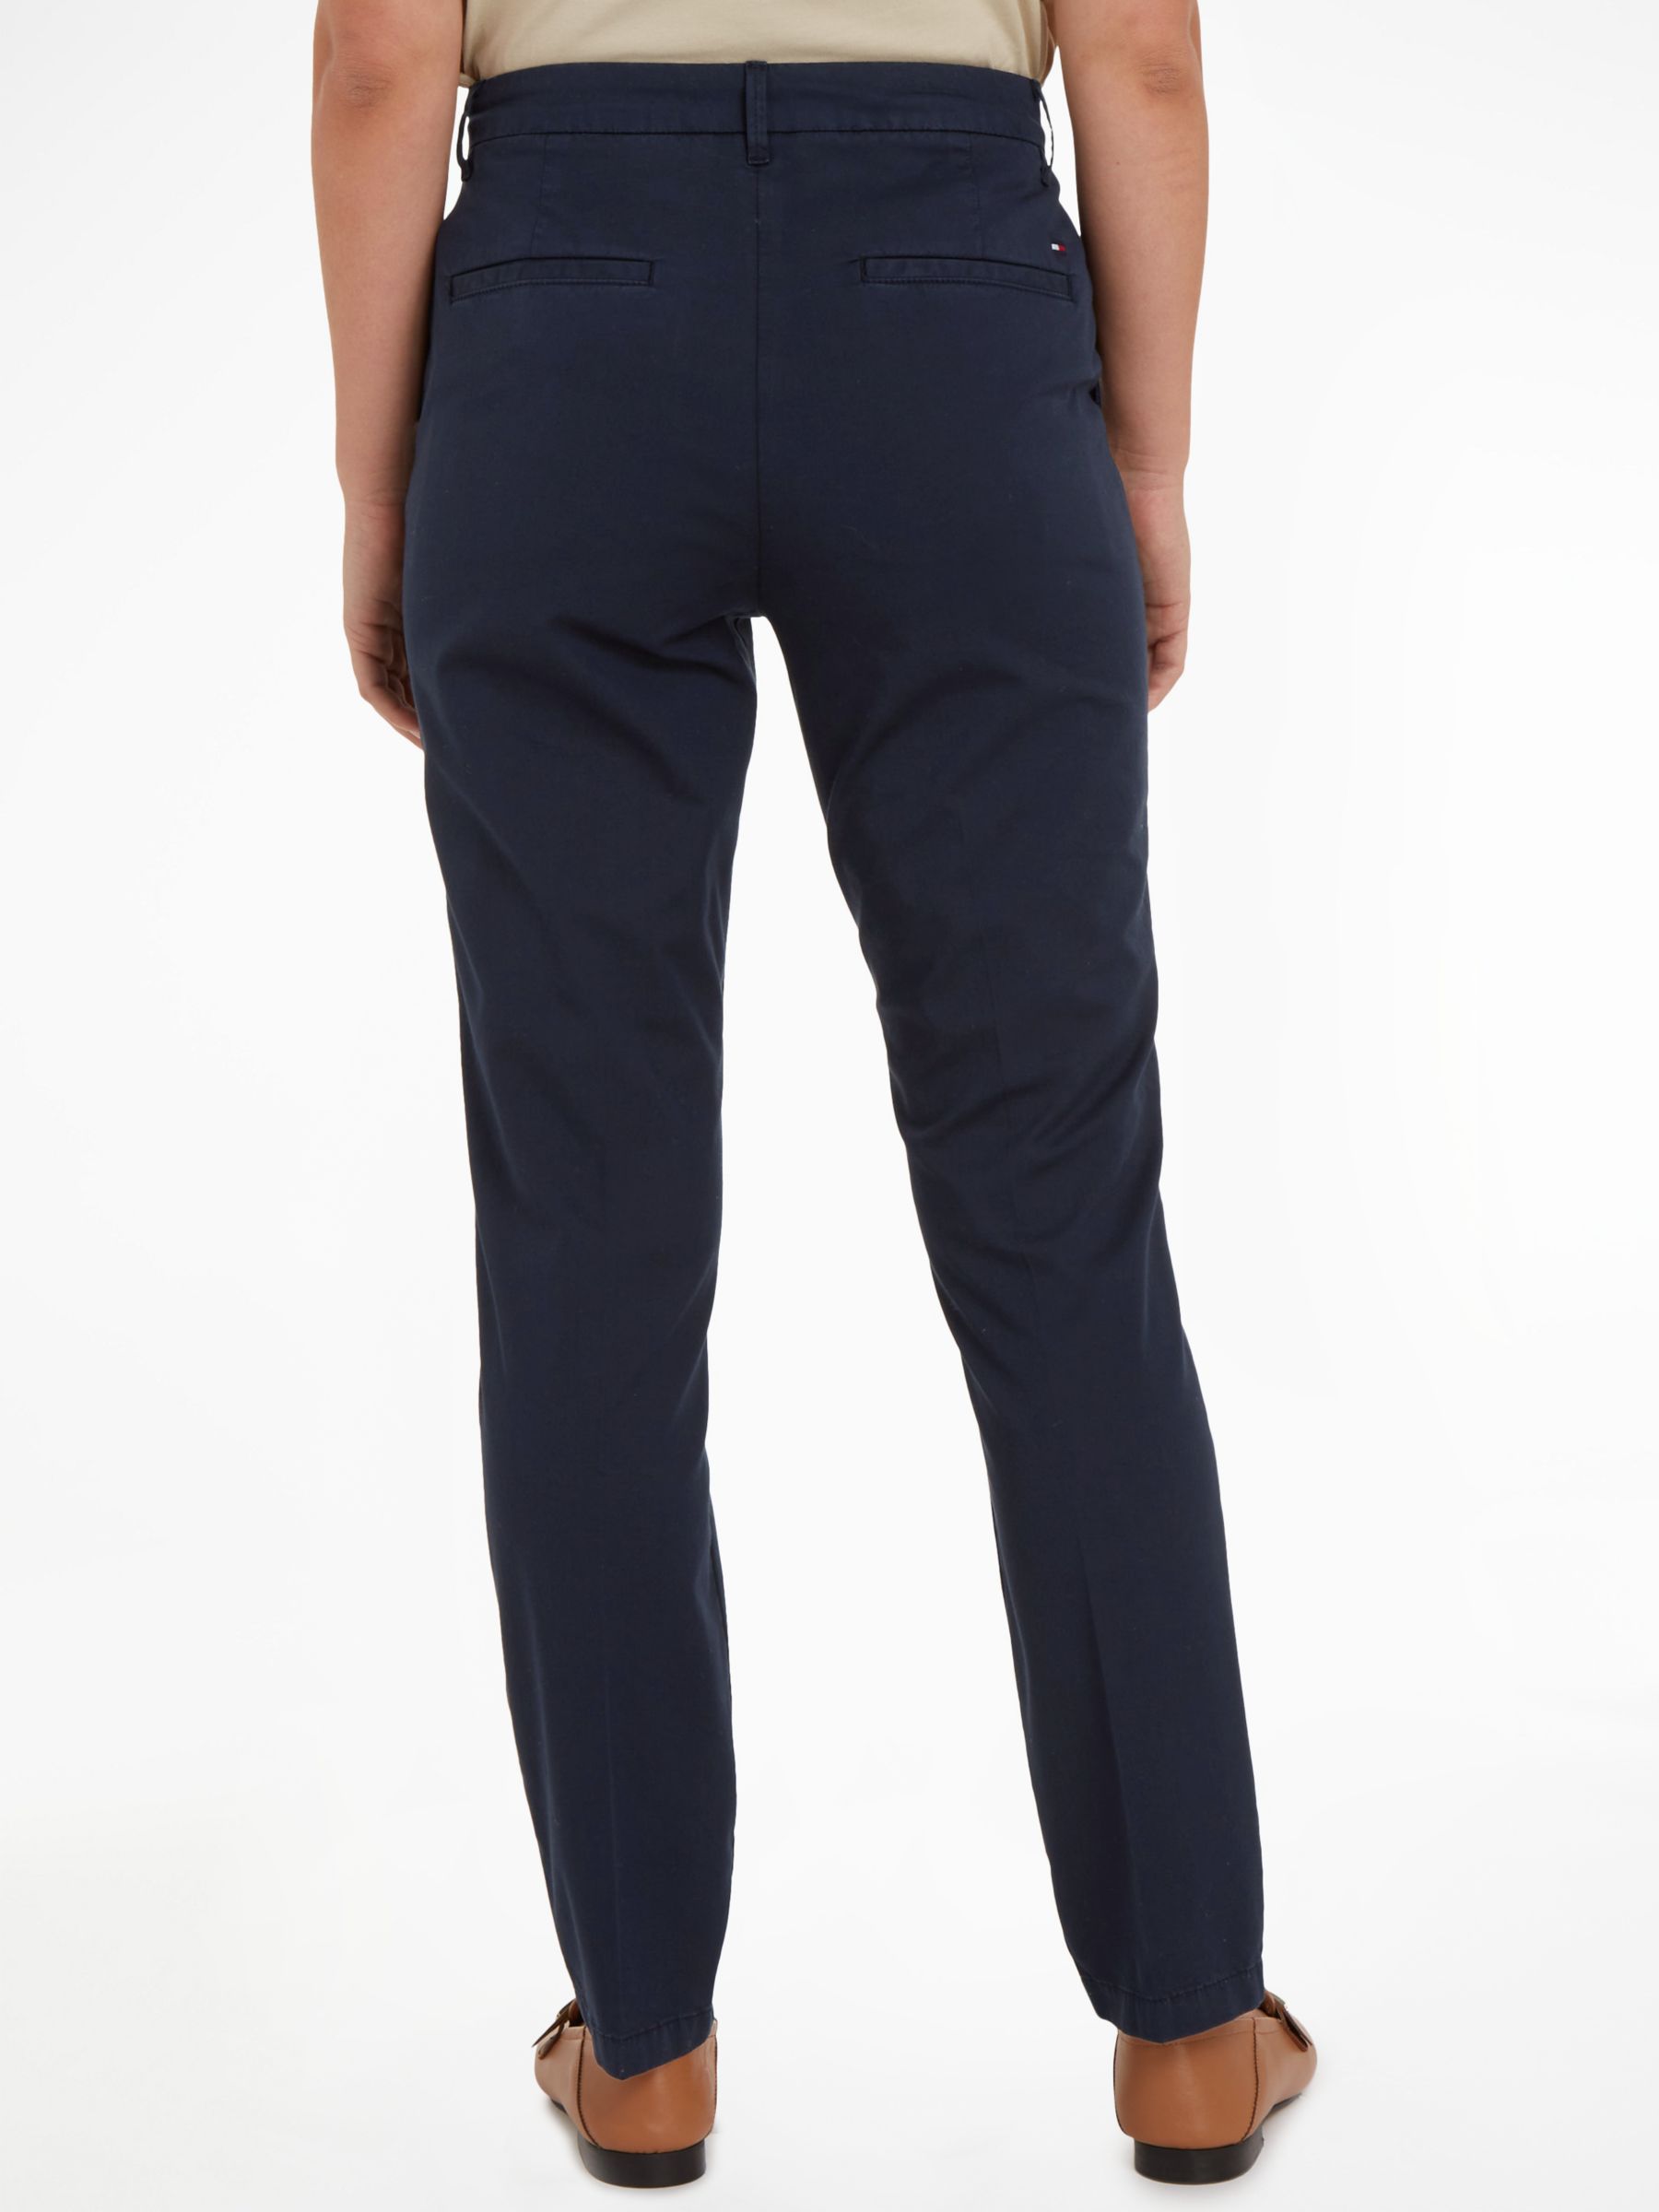 Buy Tommy Hilfiger Slim Chino Trousers, Navy Online at johnlewis.com